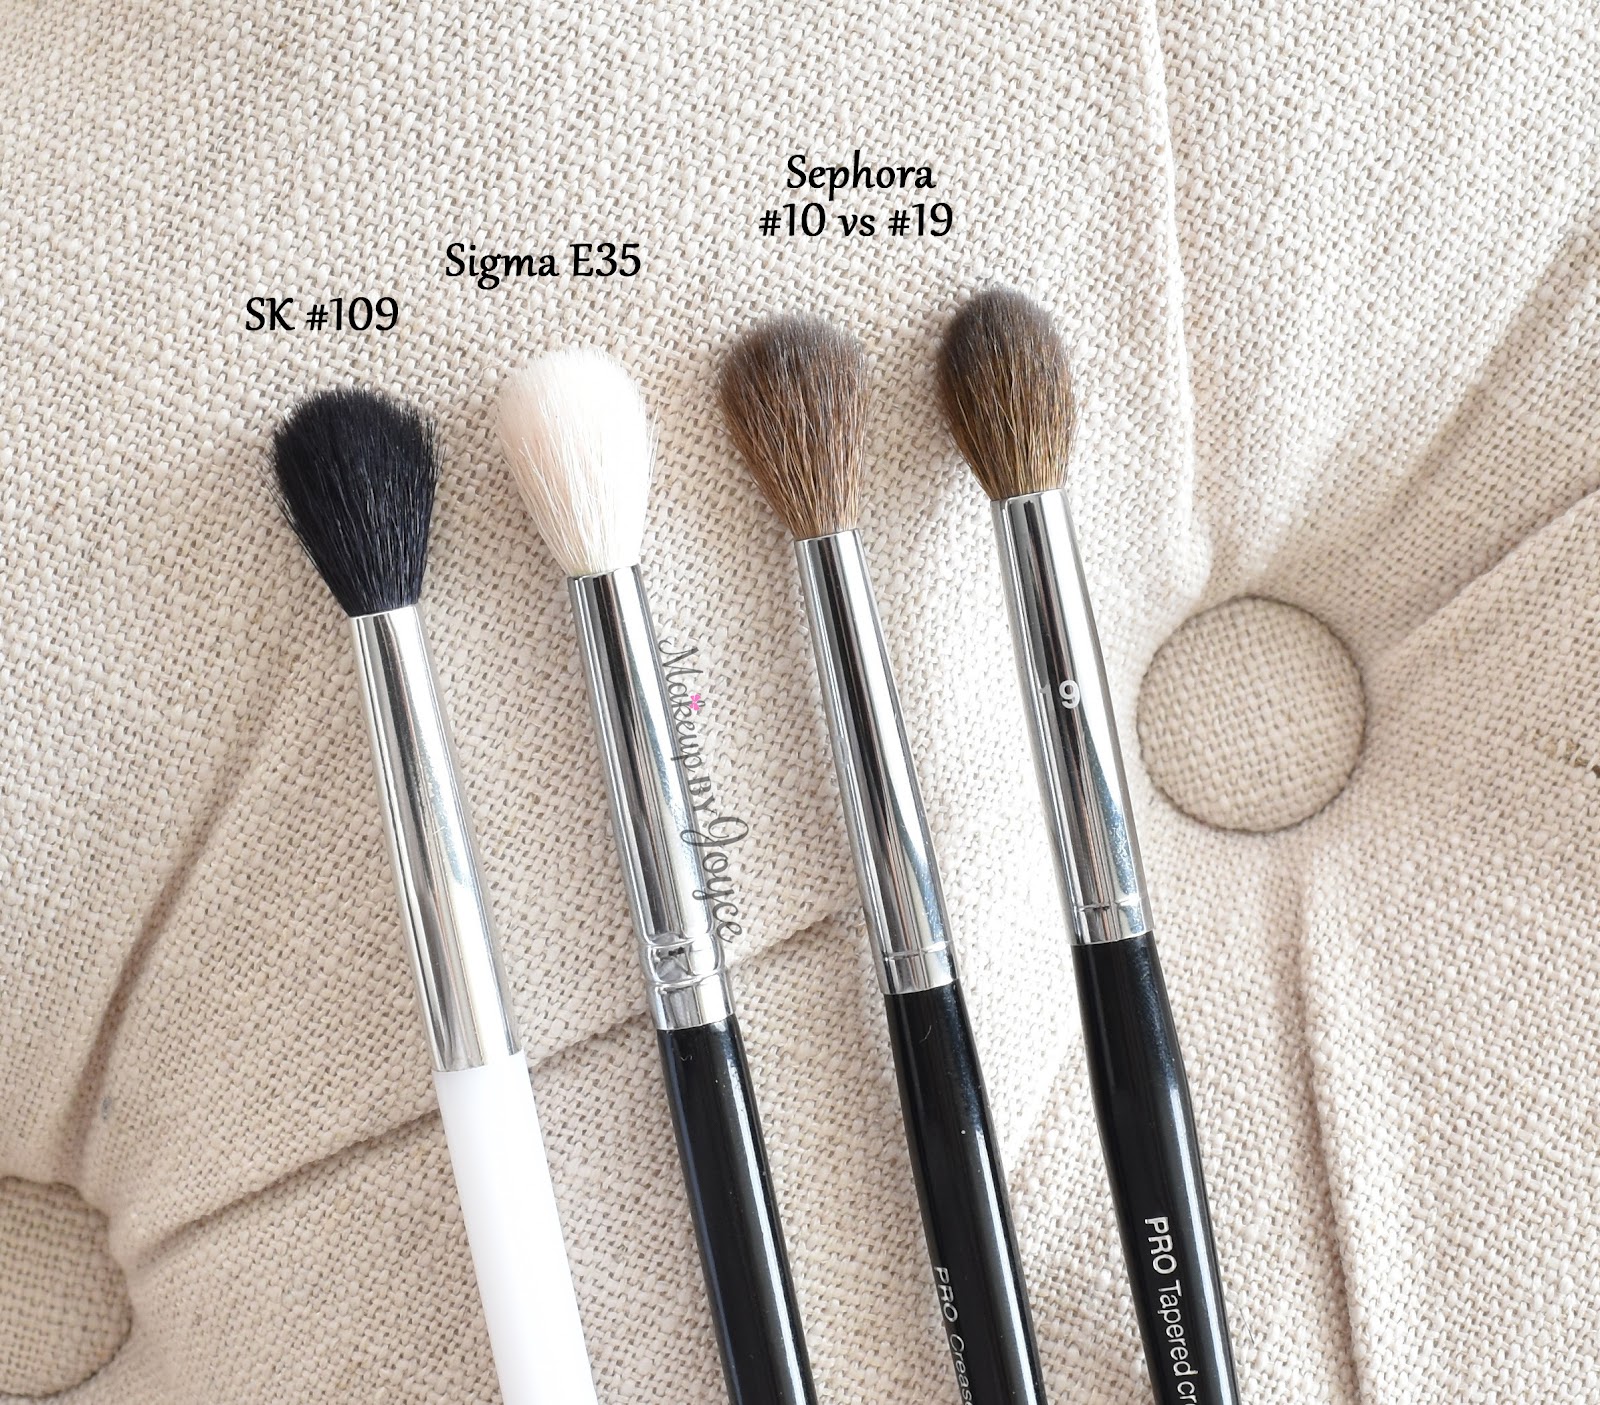 ❤ MakeupByJoyce ❤** !: Review + Comparisons - Sephora Pro Collection Brushes